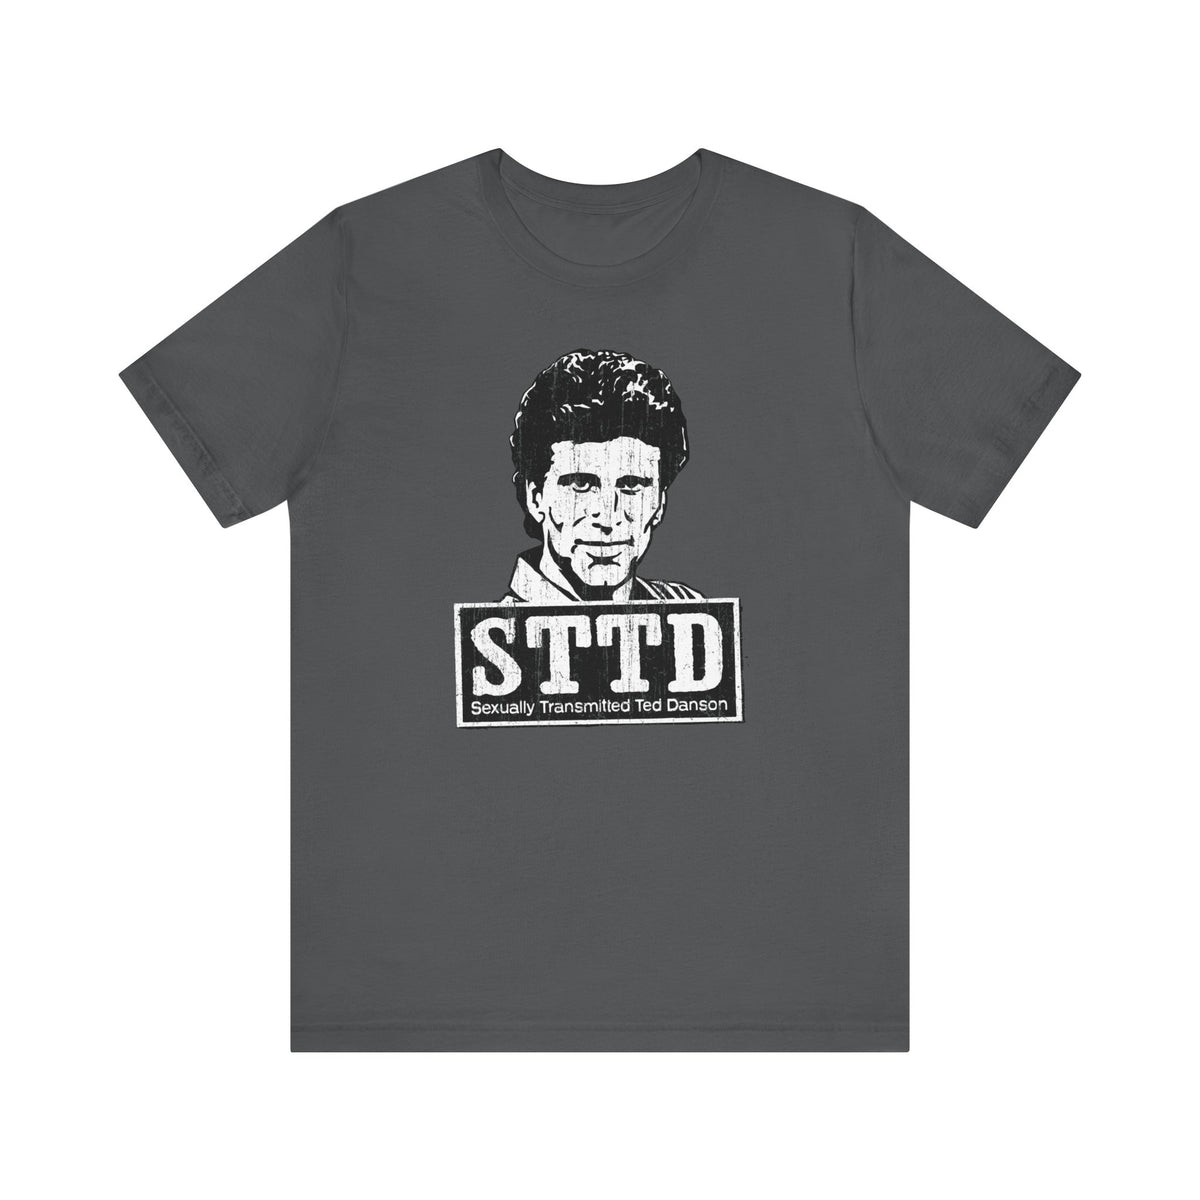 Sttd - Sexually Transmitted Ted Danson - Men's T-Shirt